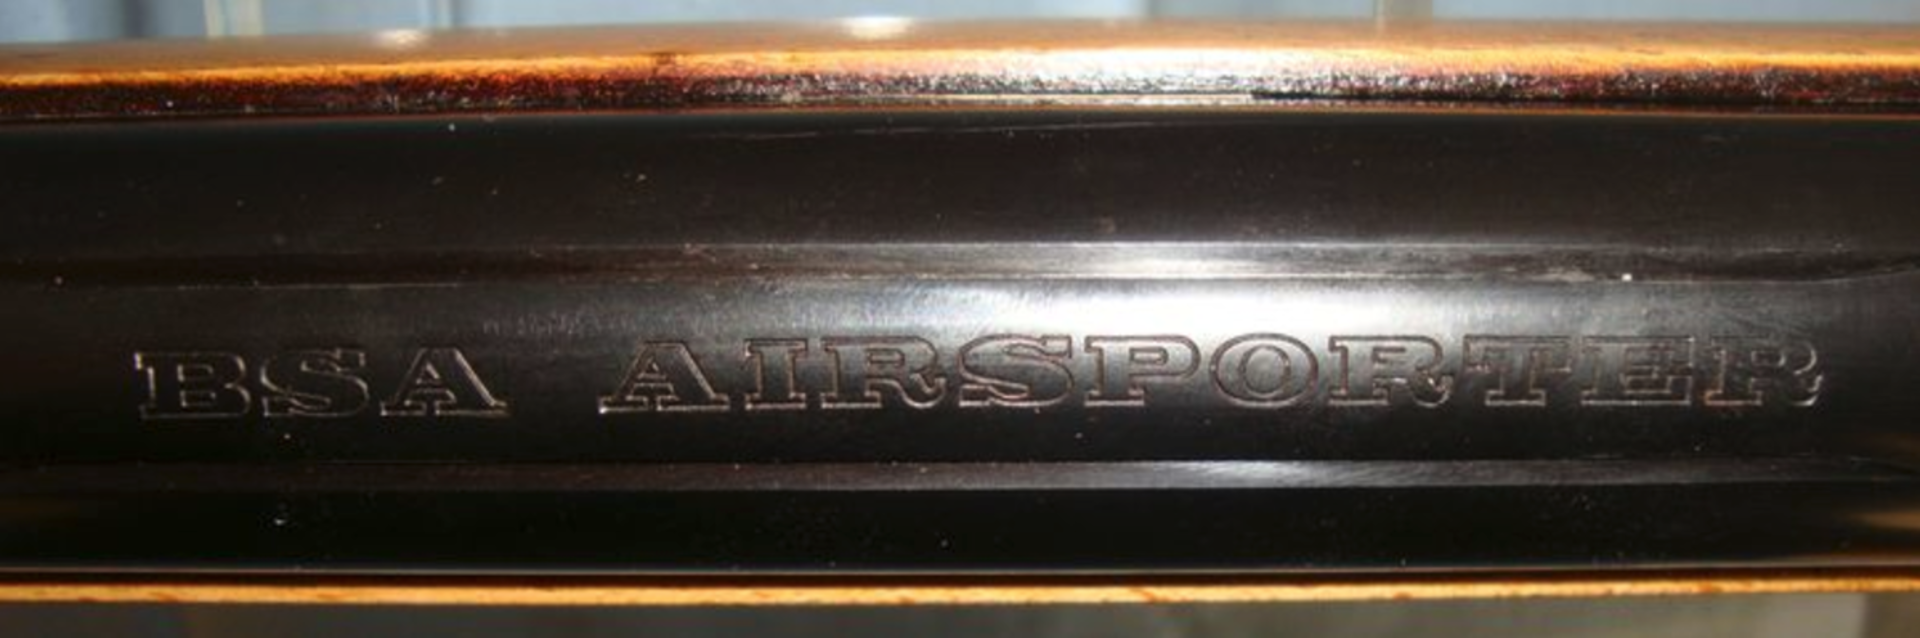 Post 1992 B.S.A. Airsporter RB2 Magnum Rotary Breech Under Lever .22 Calibre Air Rifle - Image 3 of 3